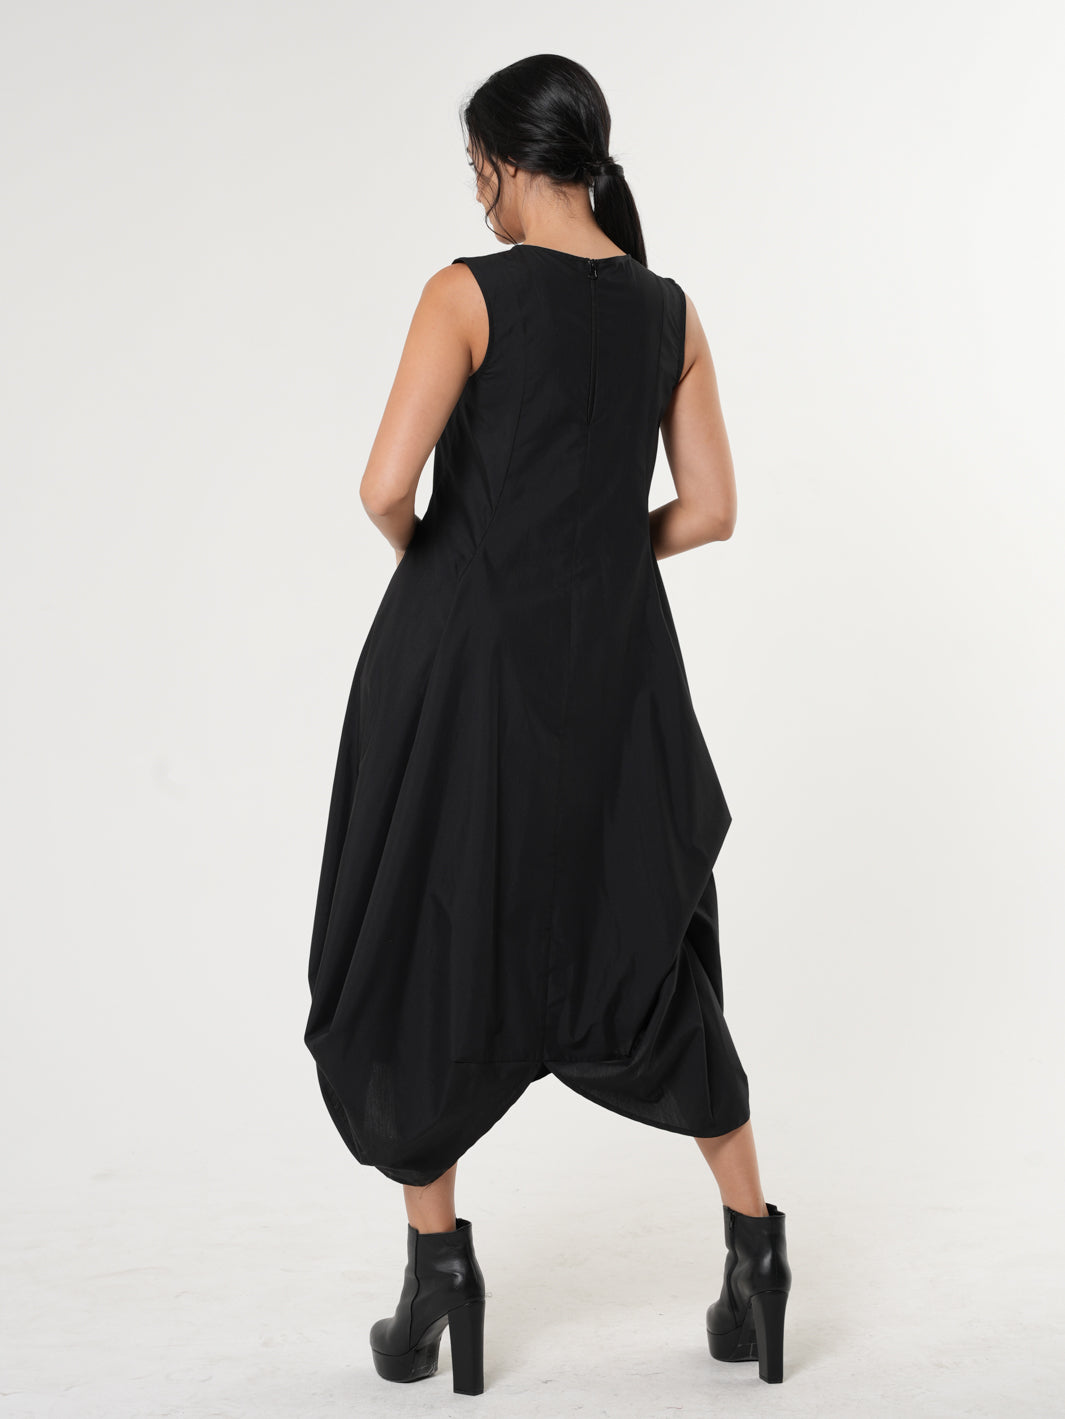 Sleeveless Black Dress With Drappings